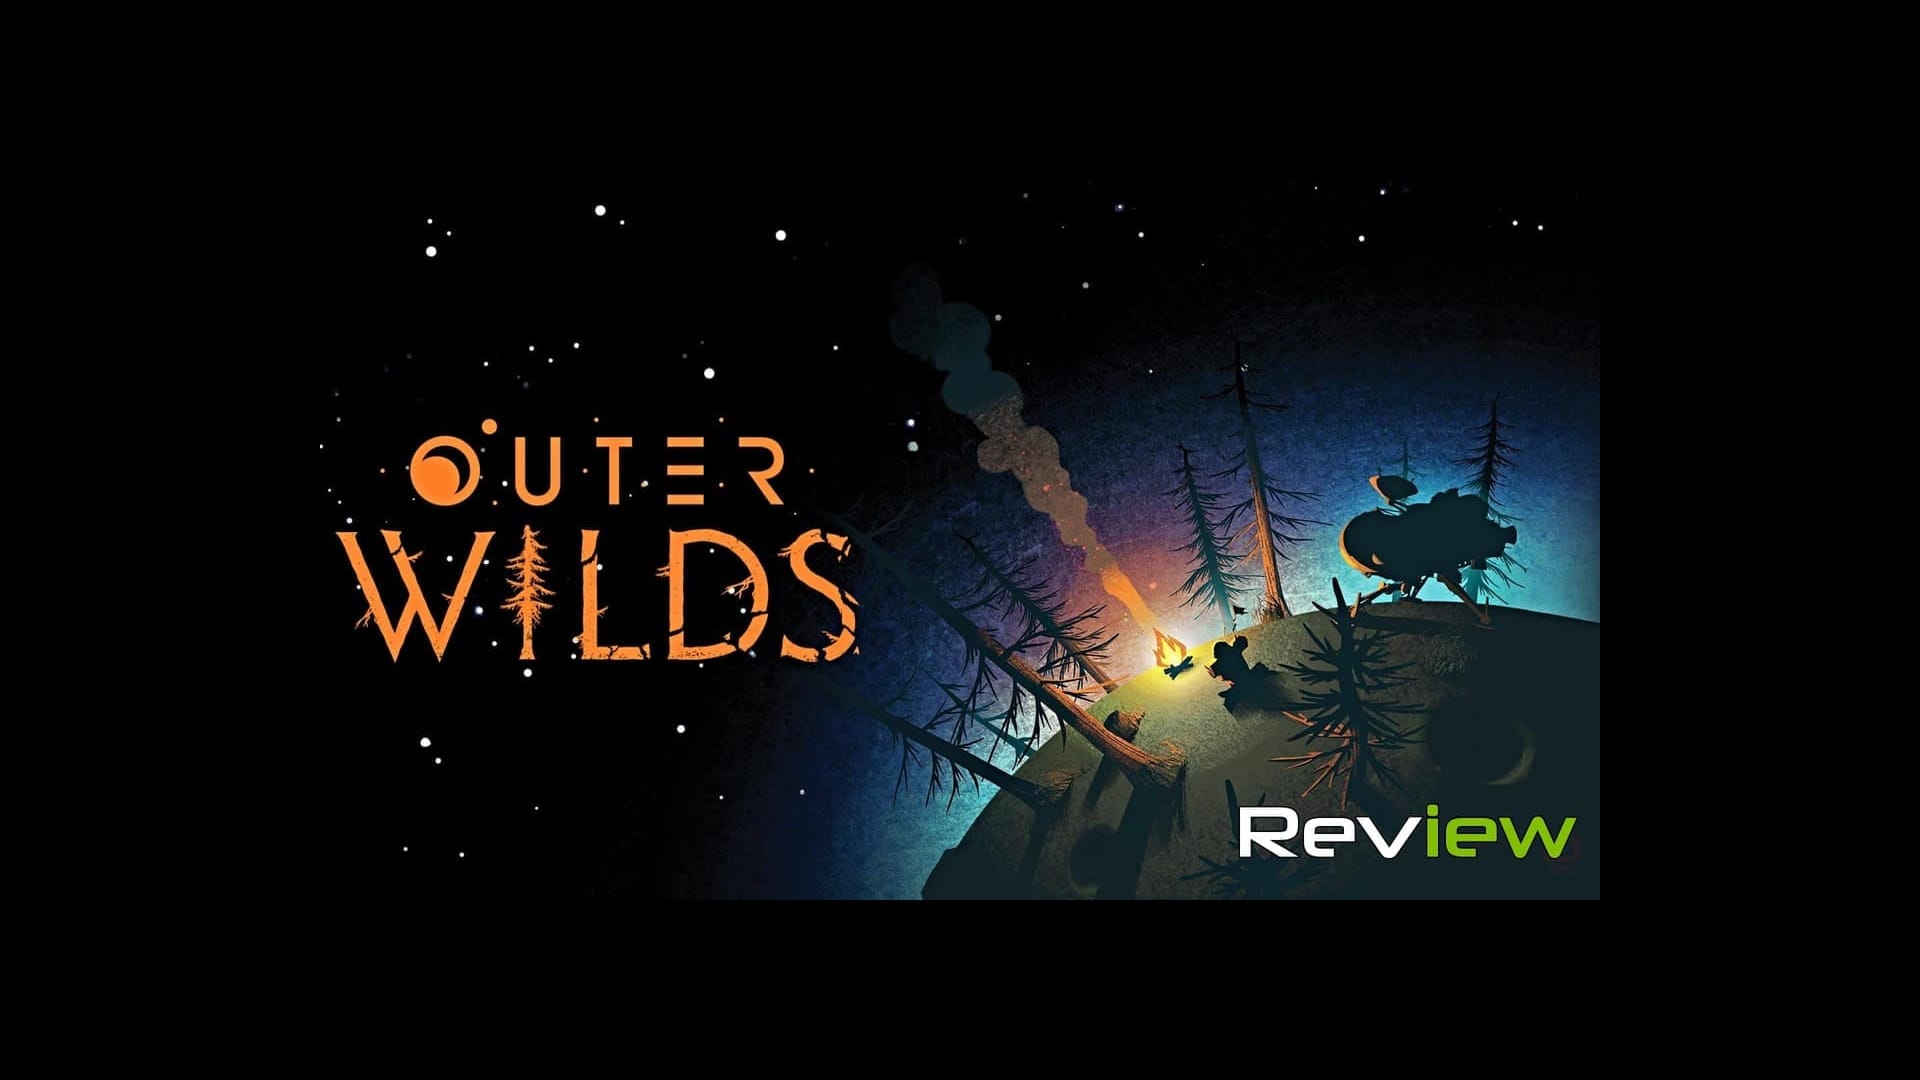 outerwilds 2, combat Edition : r/outerwilds